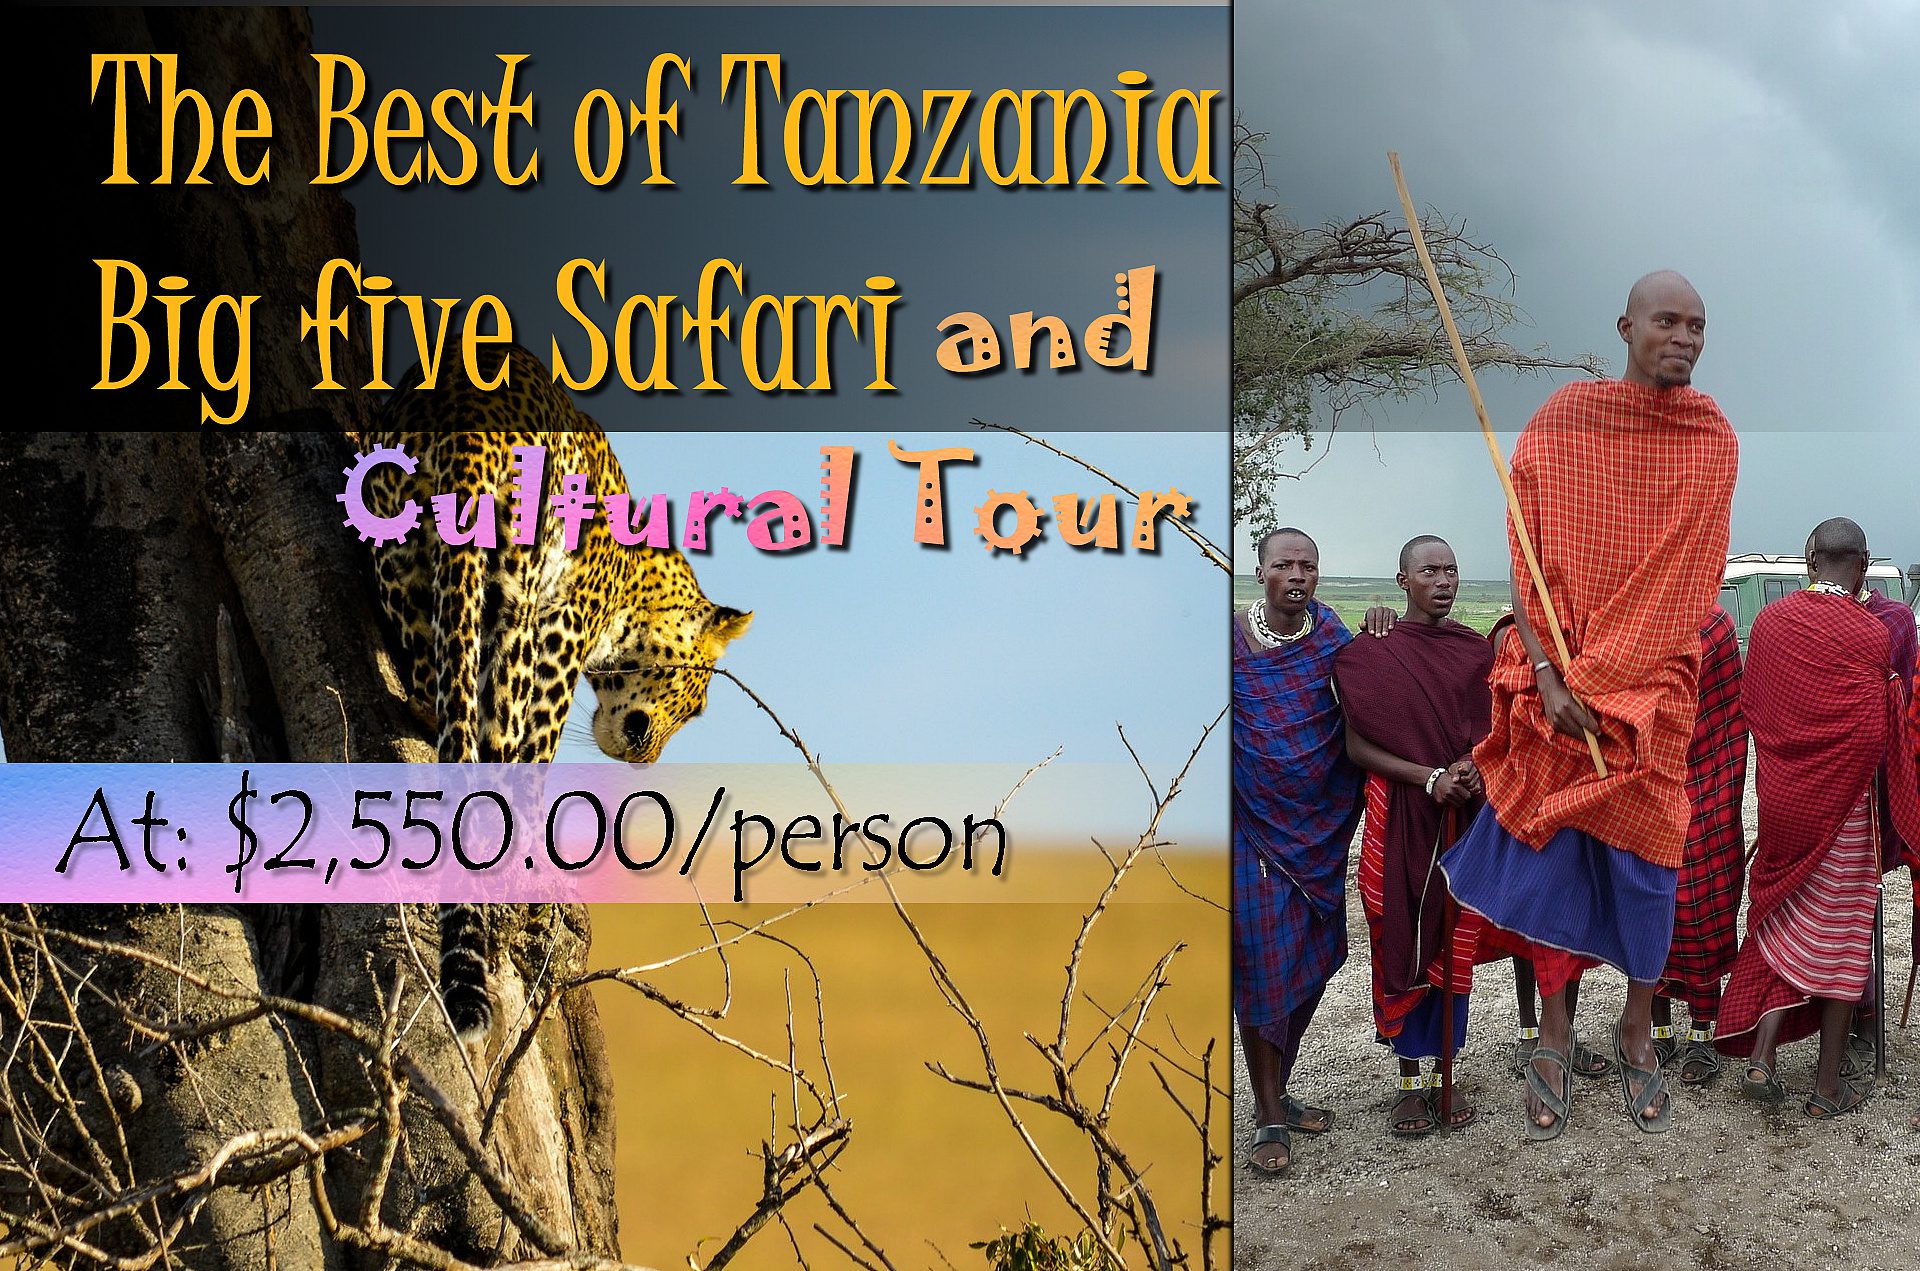 The Best of Big Five Safari and Cultural Tour